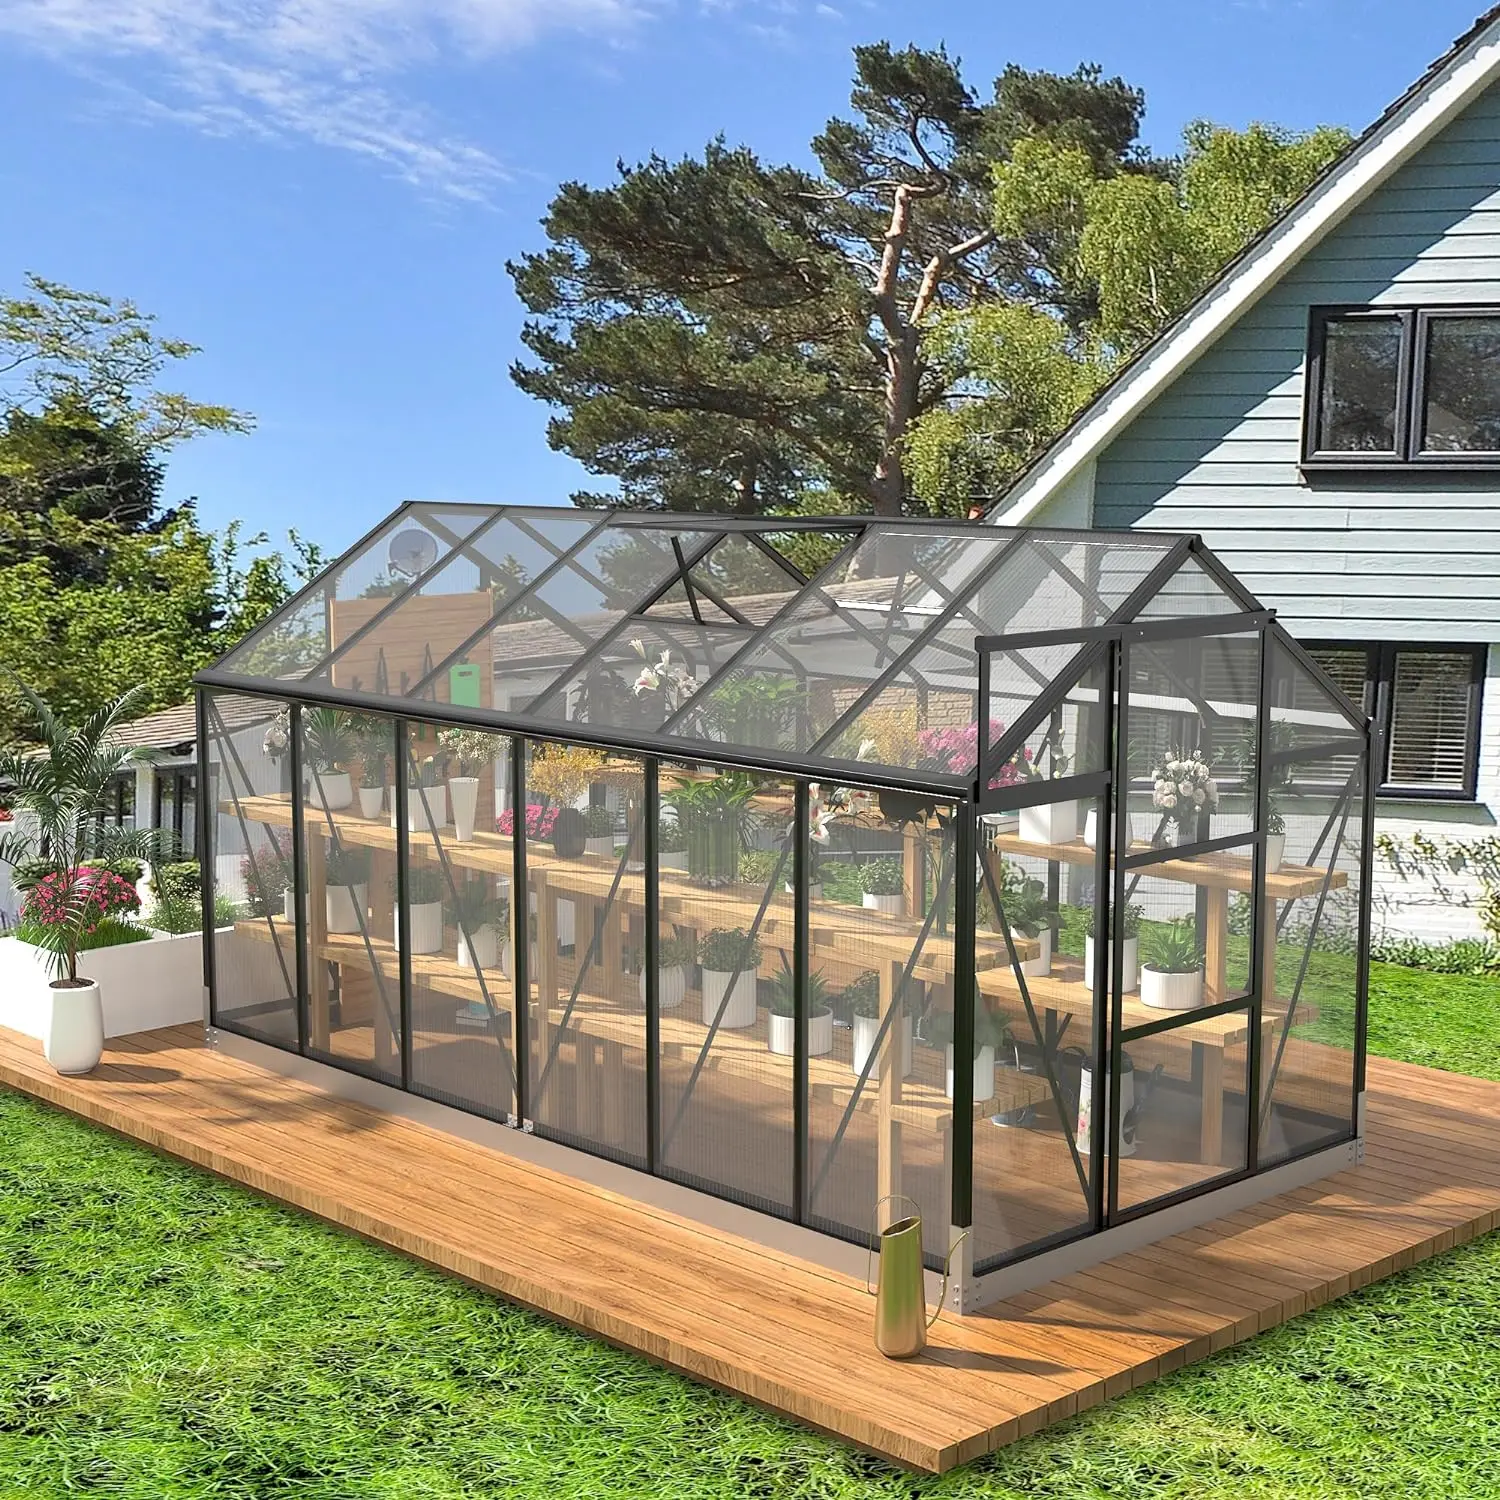 

Polycarbonate Greenhouses, 6x8/12/14 FT Green Houses for Outside with 2 Adjustable Roof Vents, Walk-in Aluminum Frame